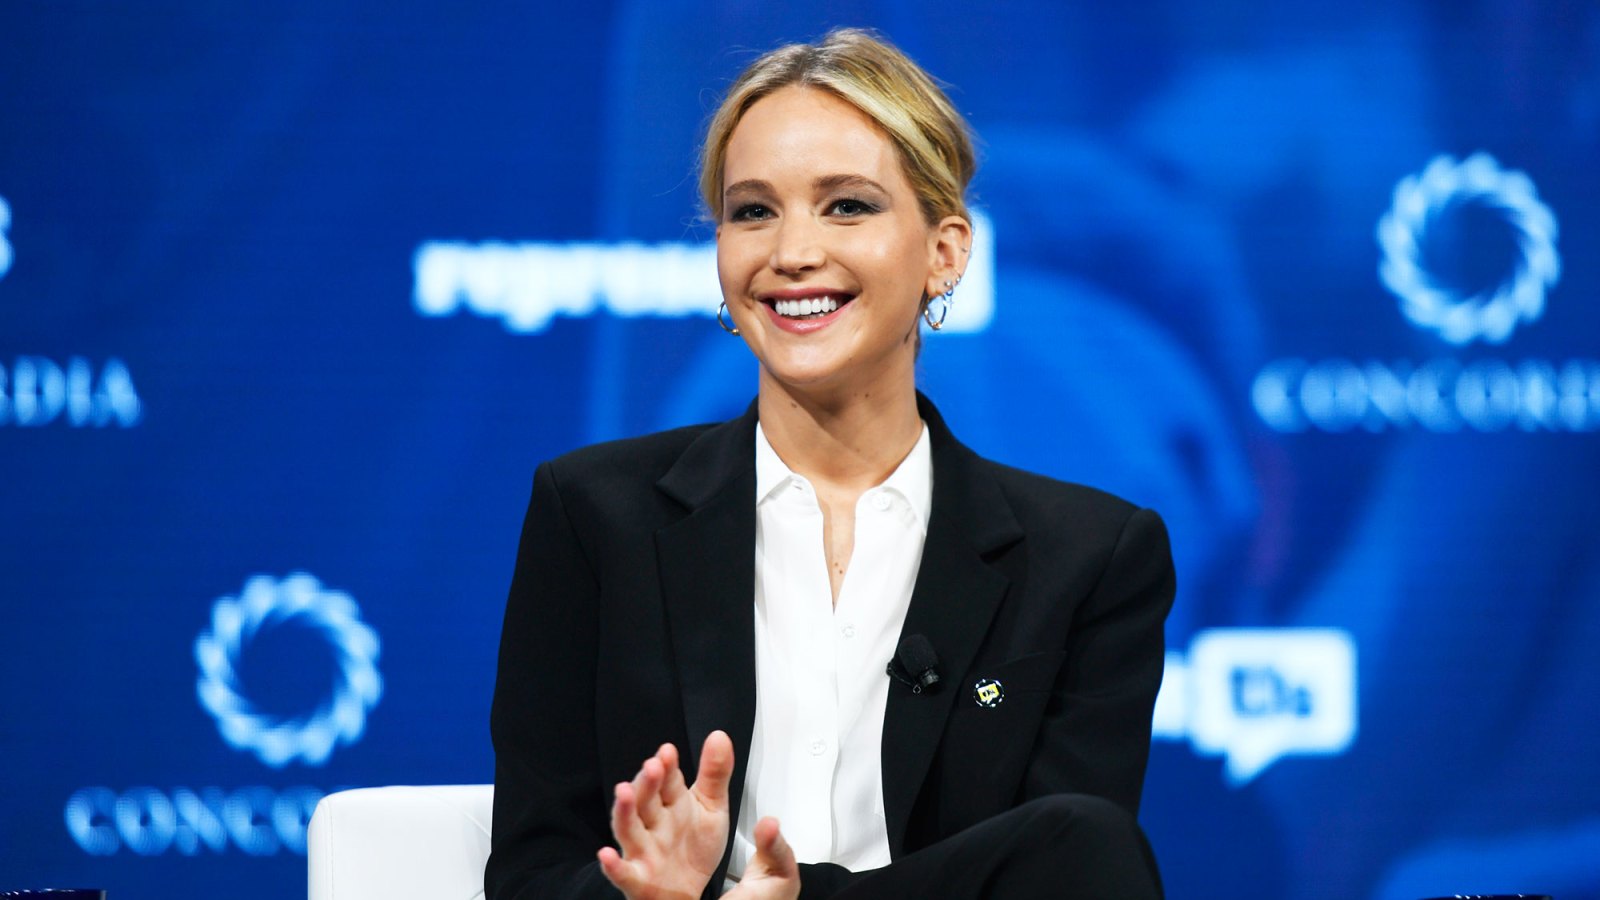 An Even Closer Look at Jennifer Lawrence's Giant Engagement Ring Reveals More Details